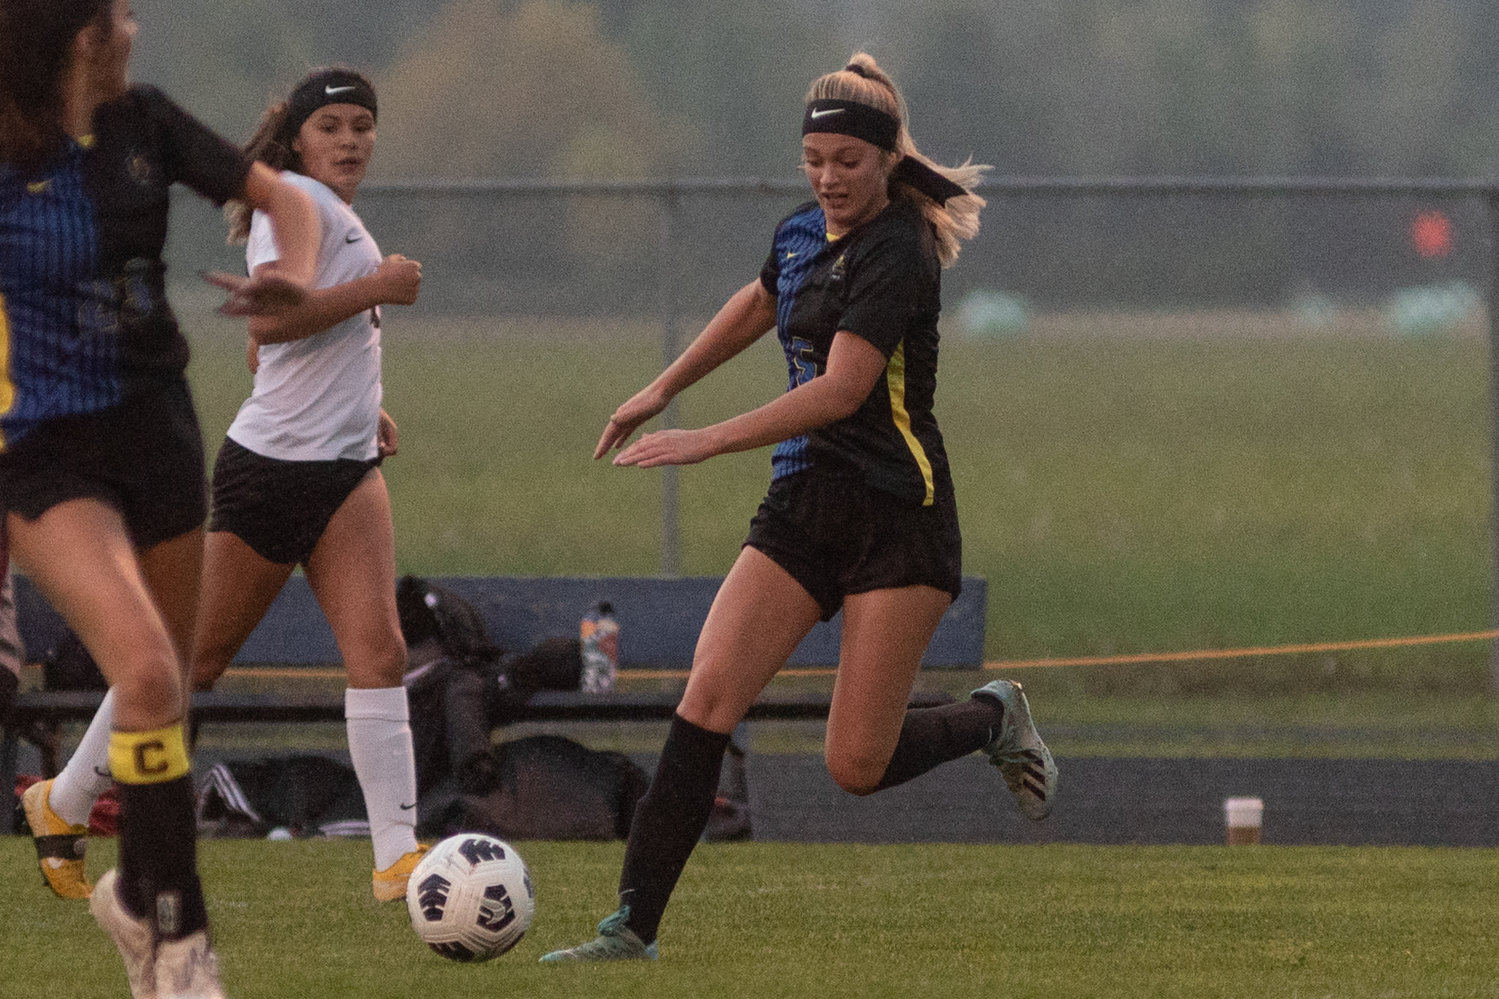 Adna forward Kaylin Todd runs down a loose ball in the Pirates game against Ocosta Wednesday night.